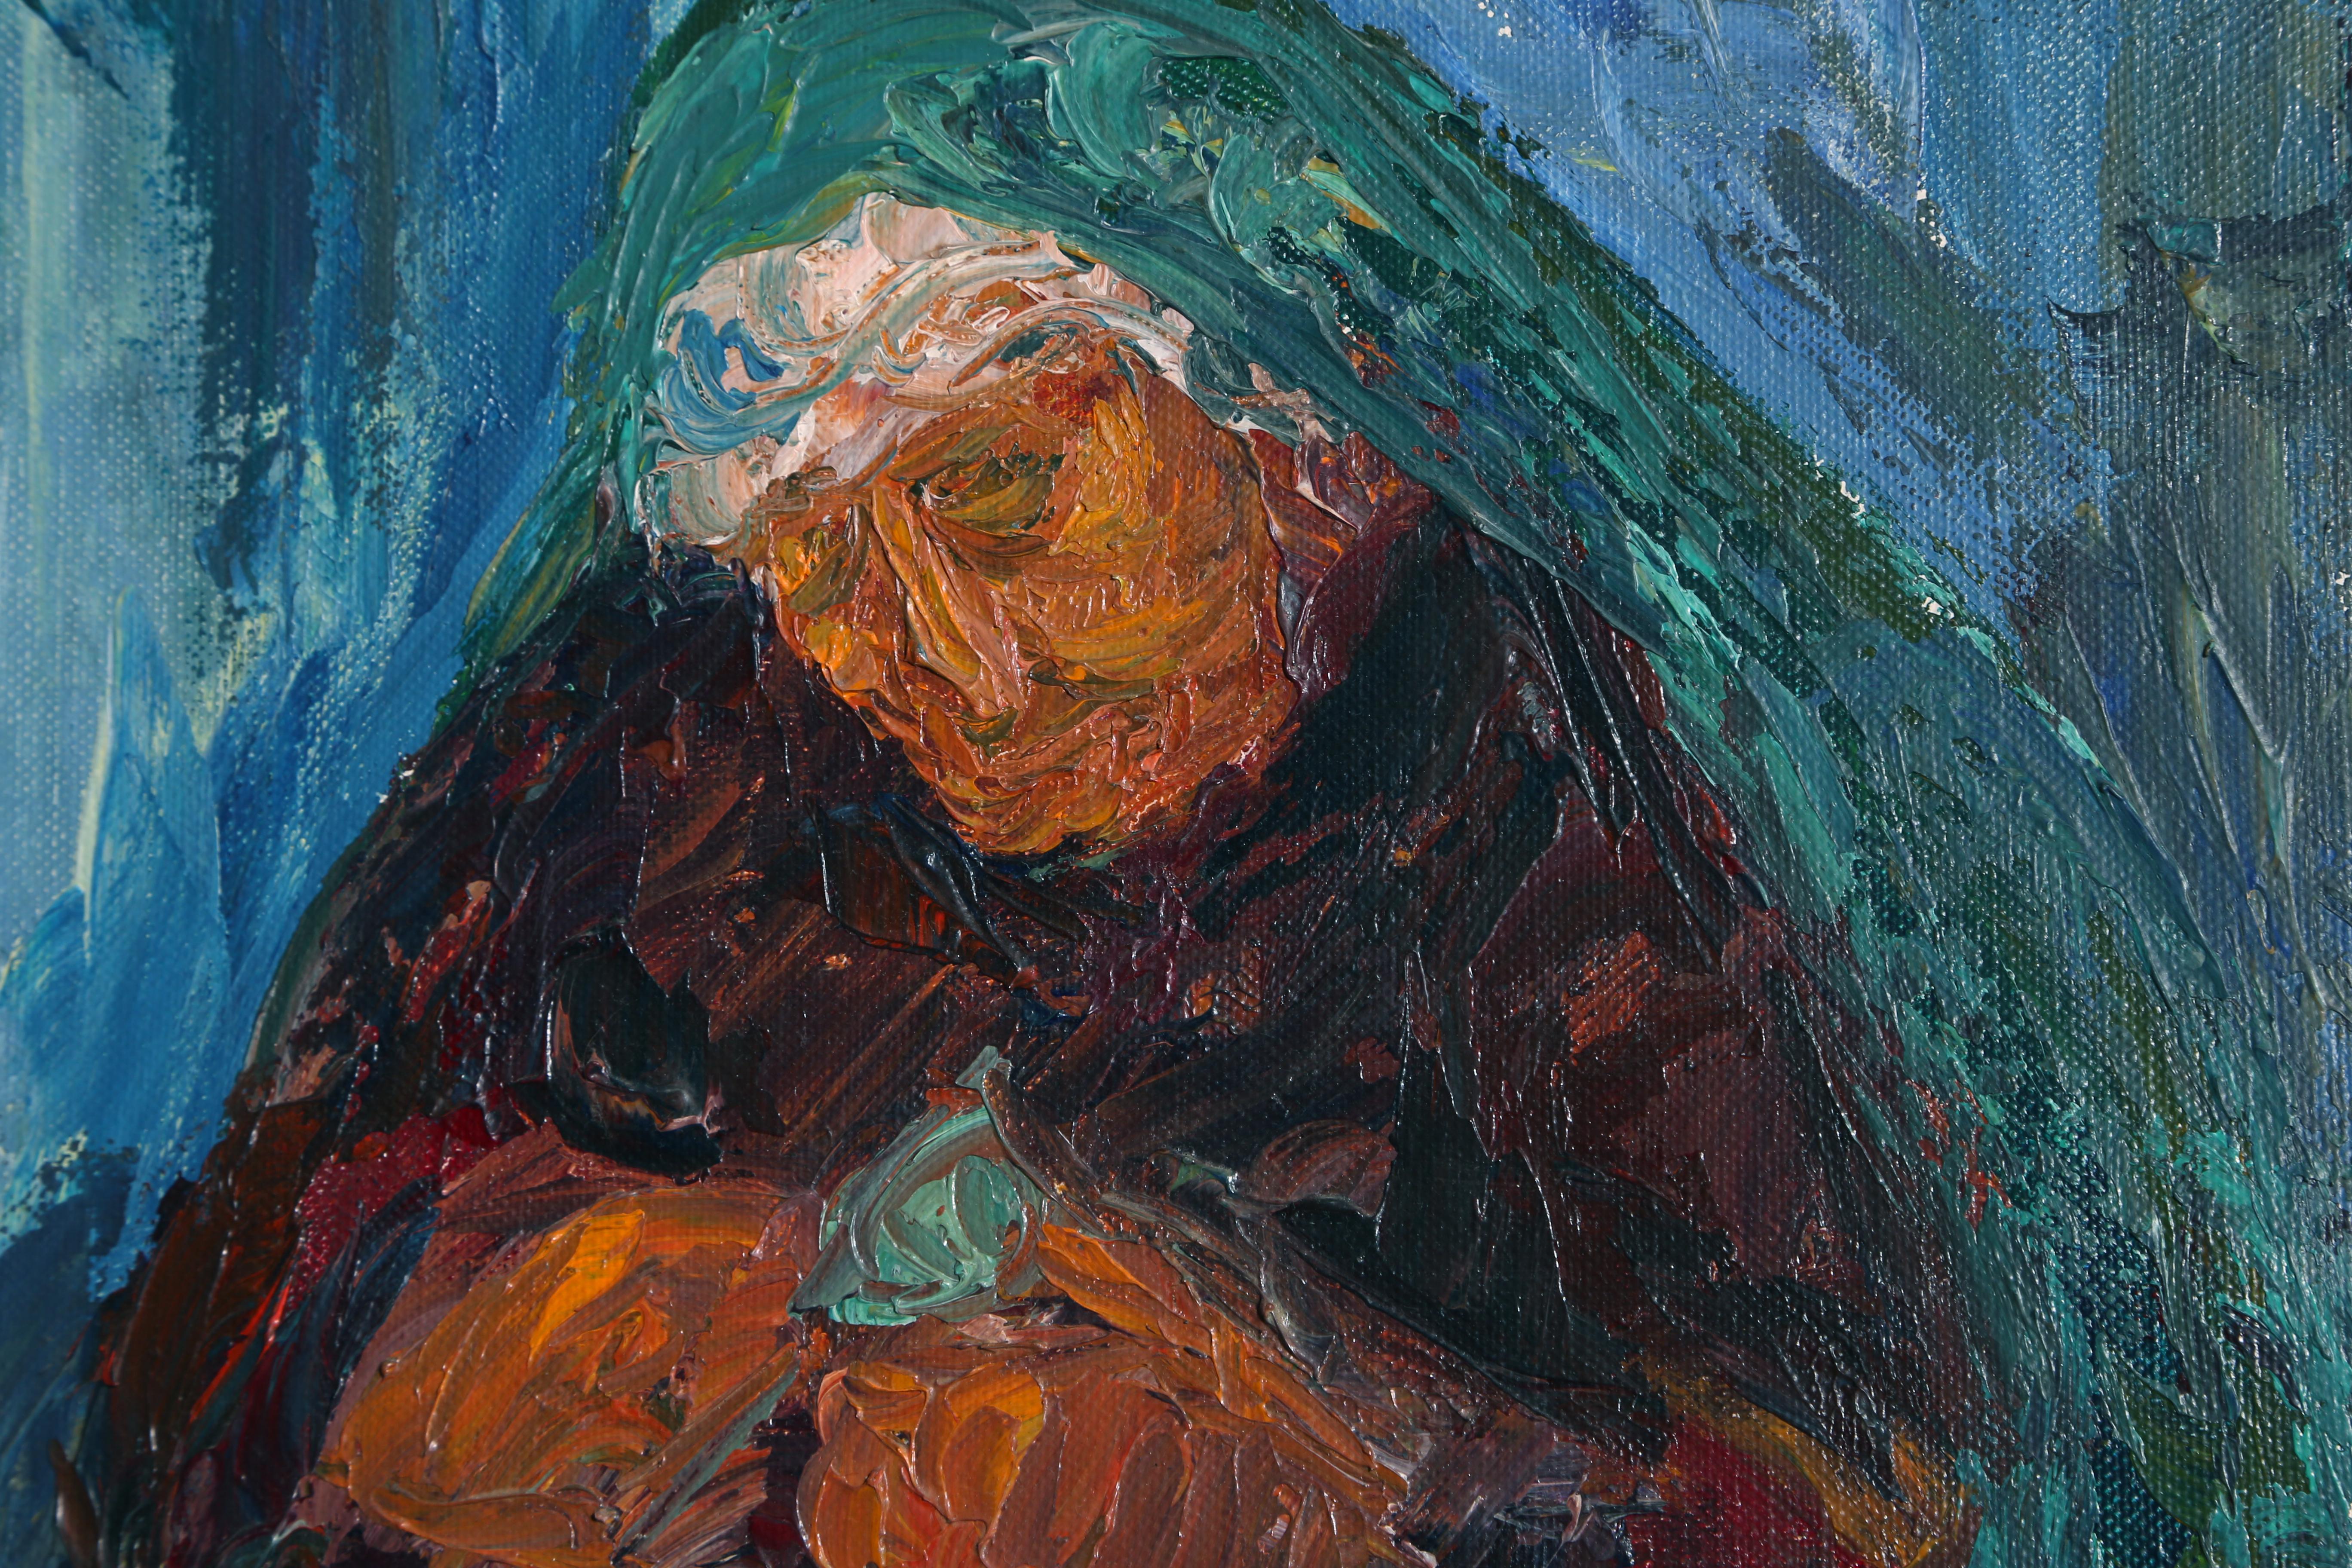 Artist:	Chaim Goldberg, Israeli (1917-2004)
Title:	Mother
Medium:	Oil on Canvas, signed in English lower left and Hebrew lower right
Size:	24 x 20 inches
Frame Size 32 x 27.5 inches